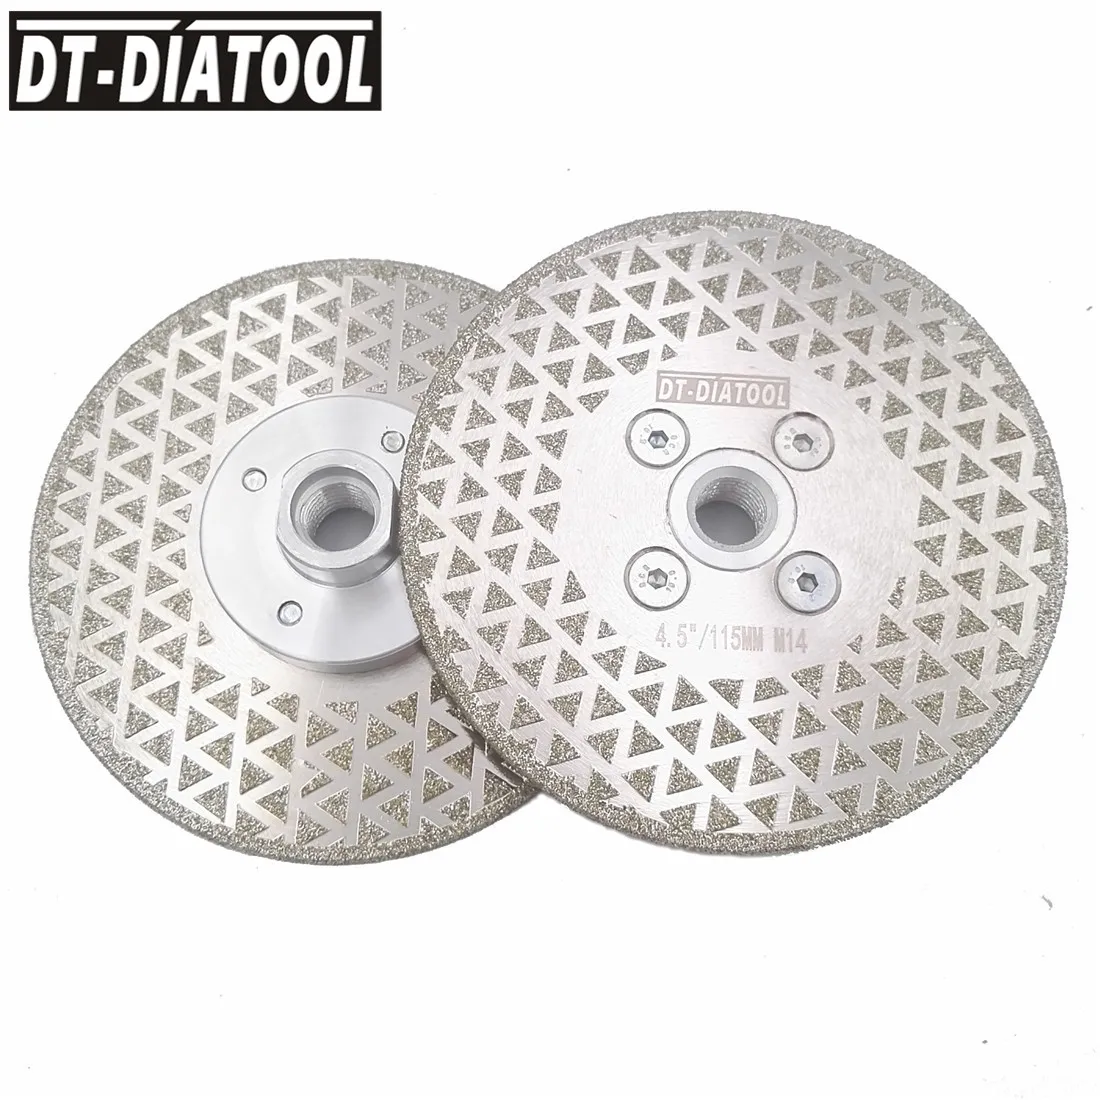 

DT-DIATOOL 2pcs M14 Thread Dia 115mm/4.5 Inch Electroplated Both Side Diamond Cutting & Grinding Disc Granite Marble Saw Blade